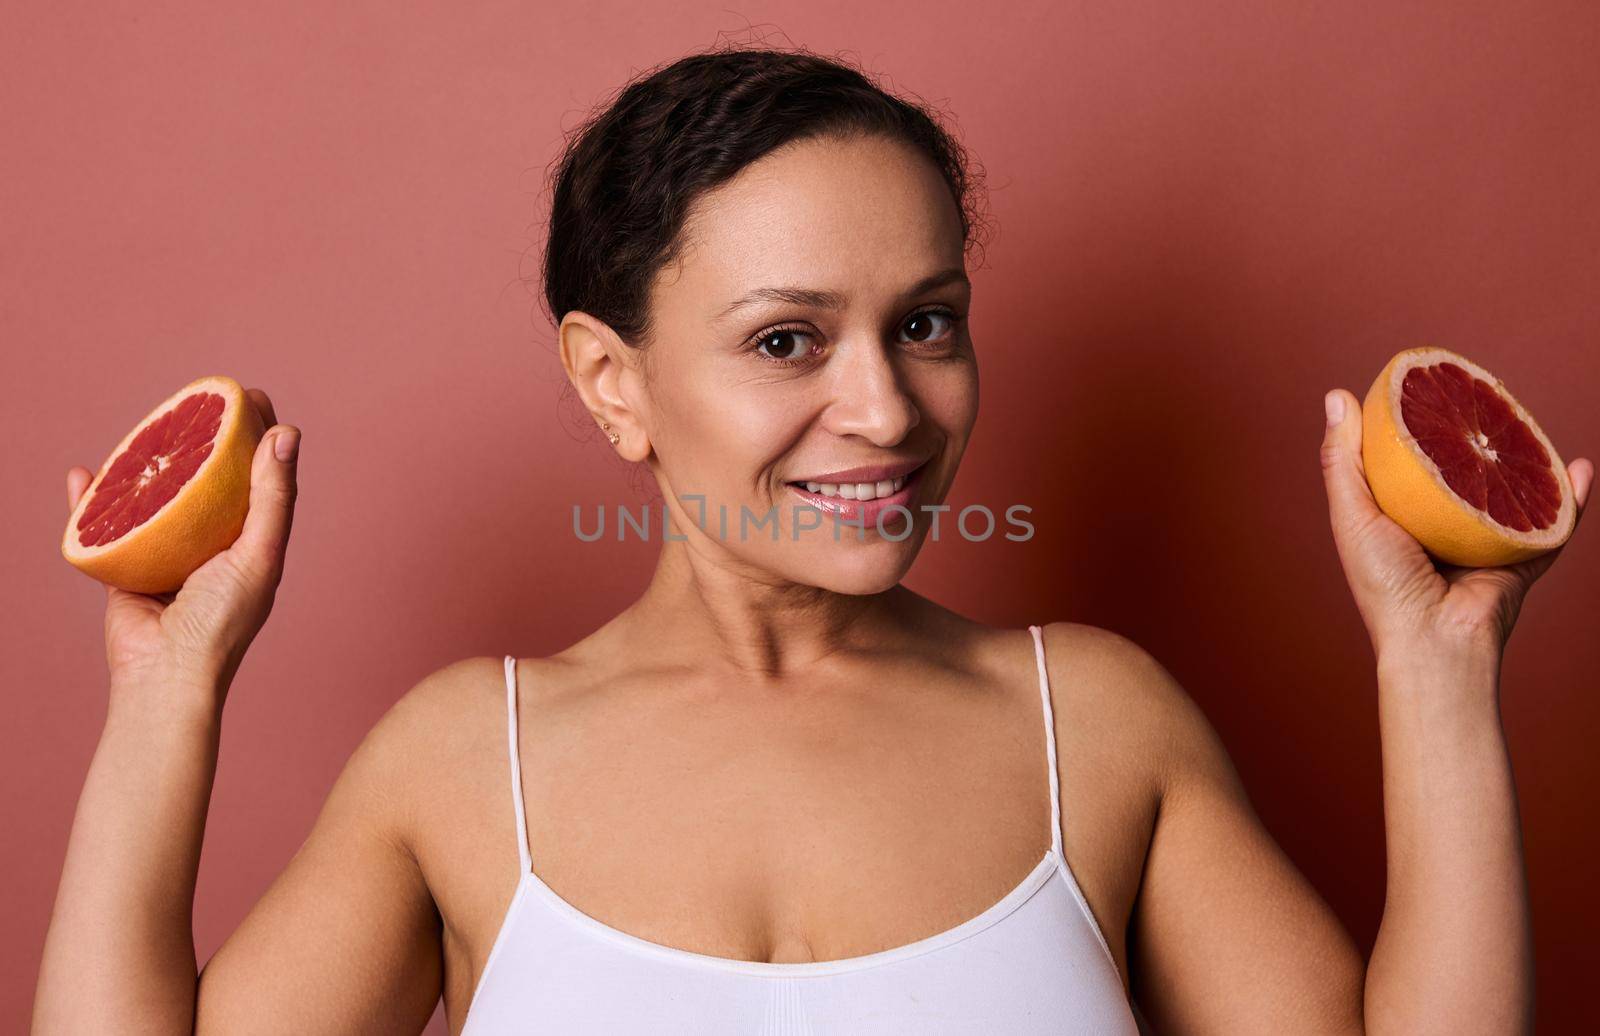 Charming middle aged African pretty woman in white top smiles looking at camera, holding halves of red juicy fresh grapefruit in her hands, isolated over coral background with copy space for ads.